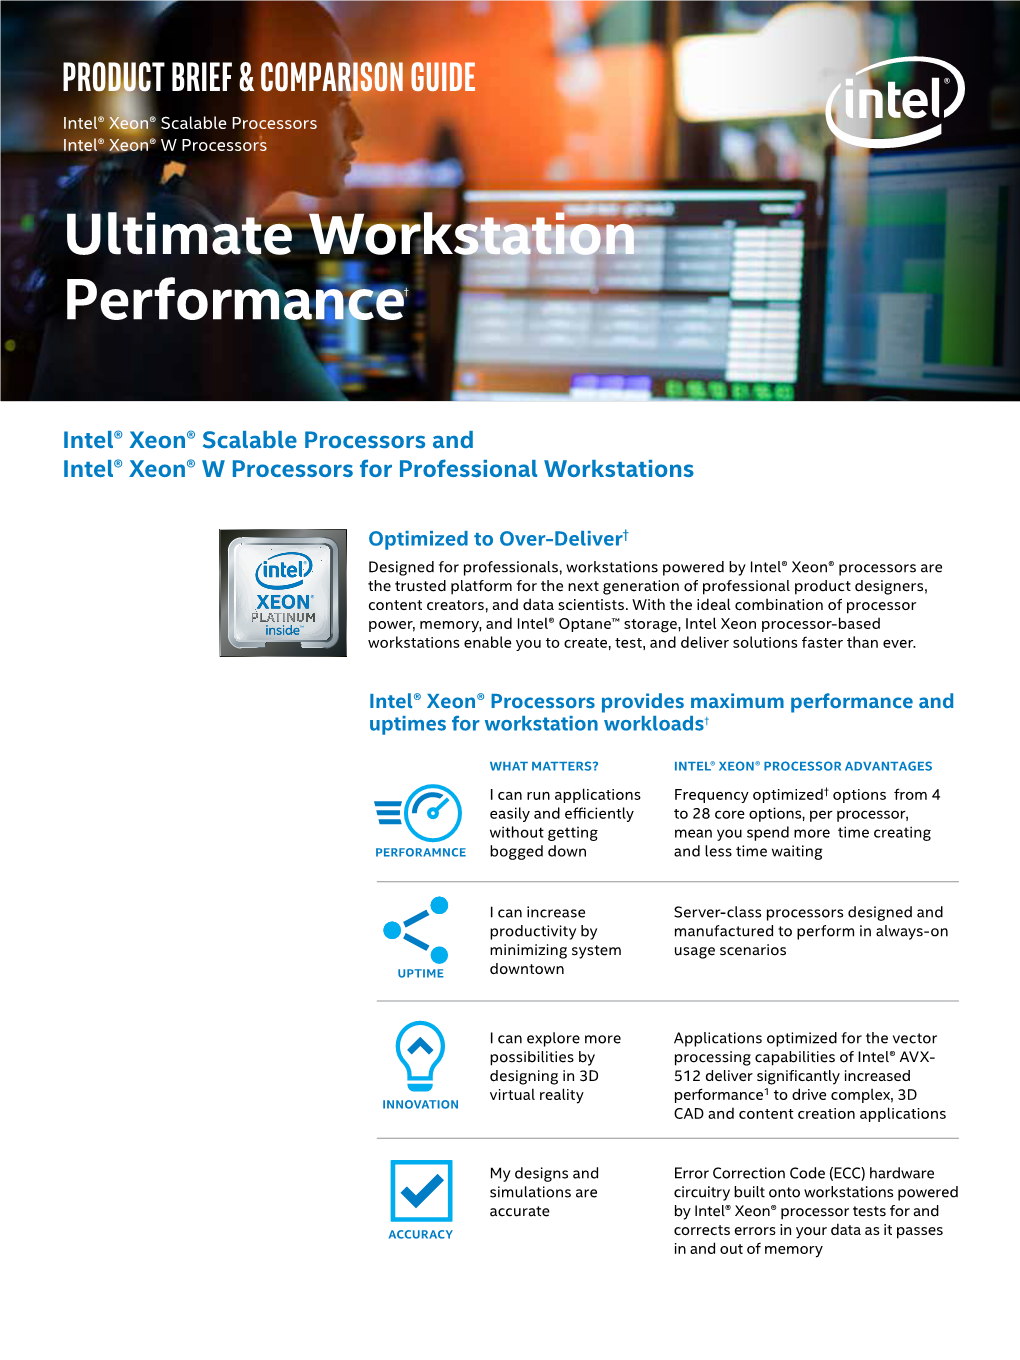 Intel® Xeon® Scalable and W Processors for Workstations Brief